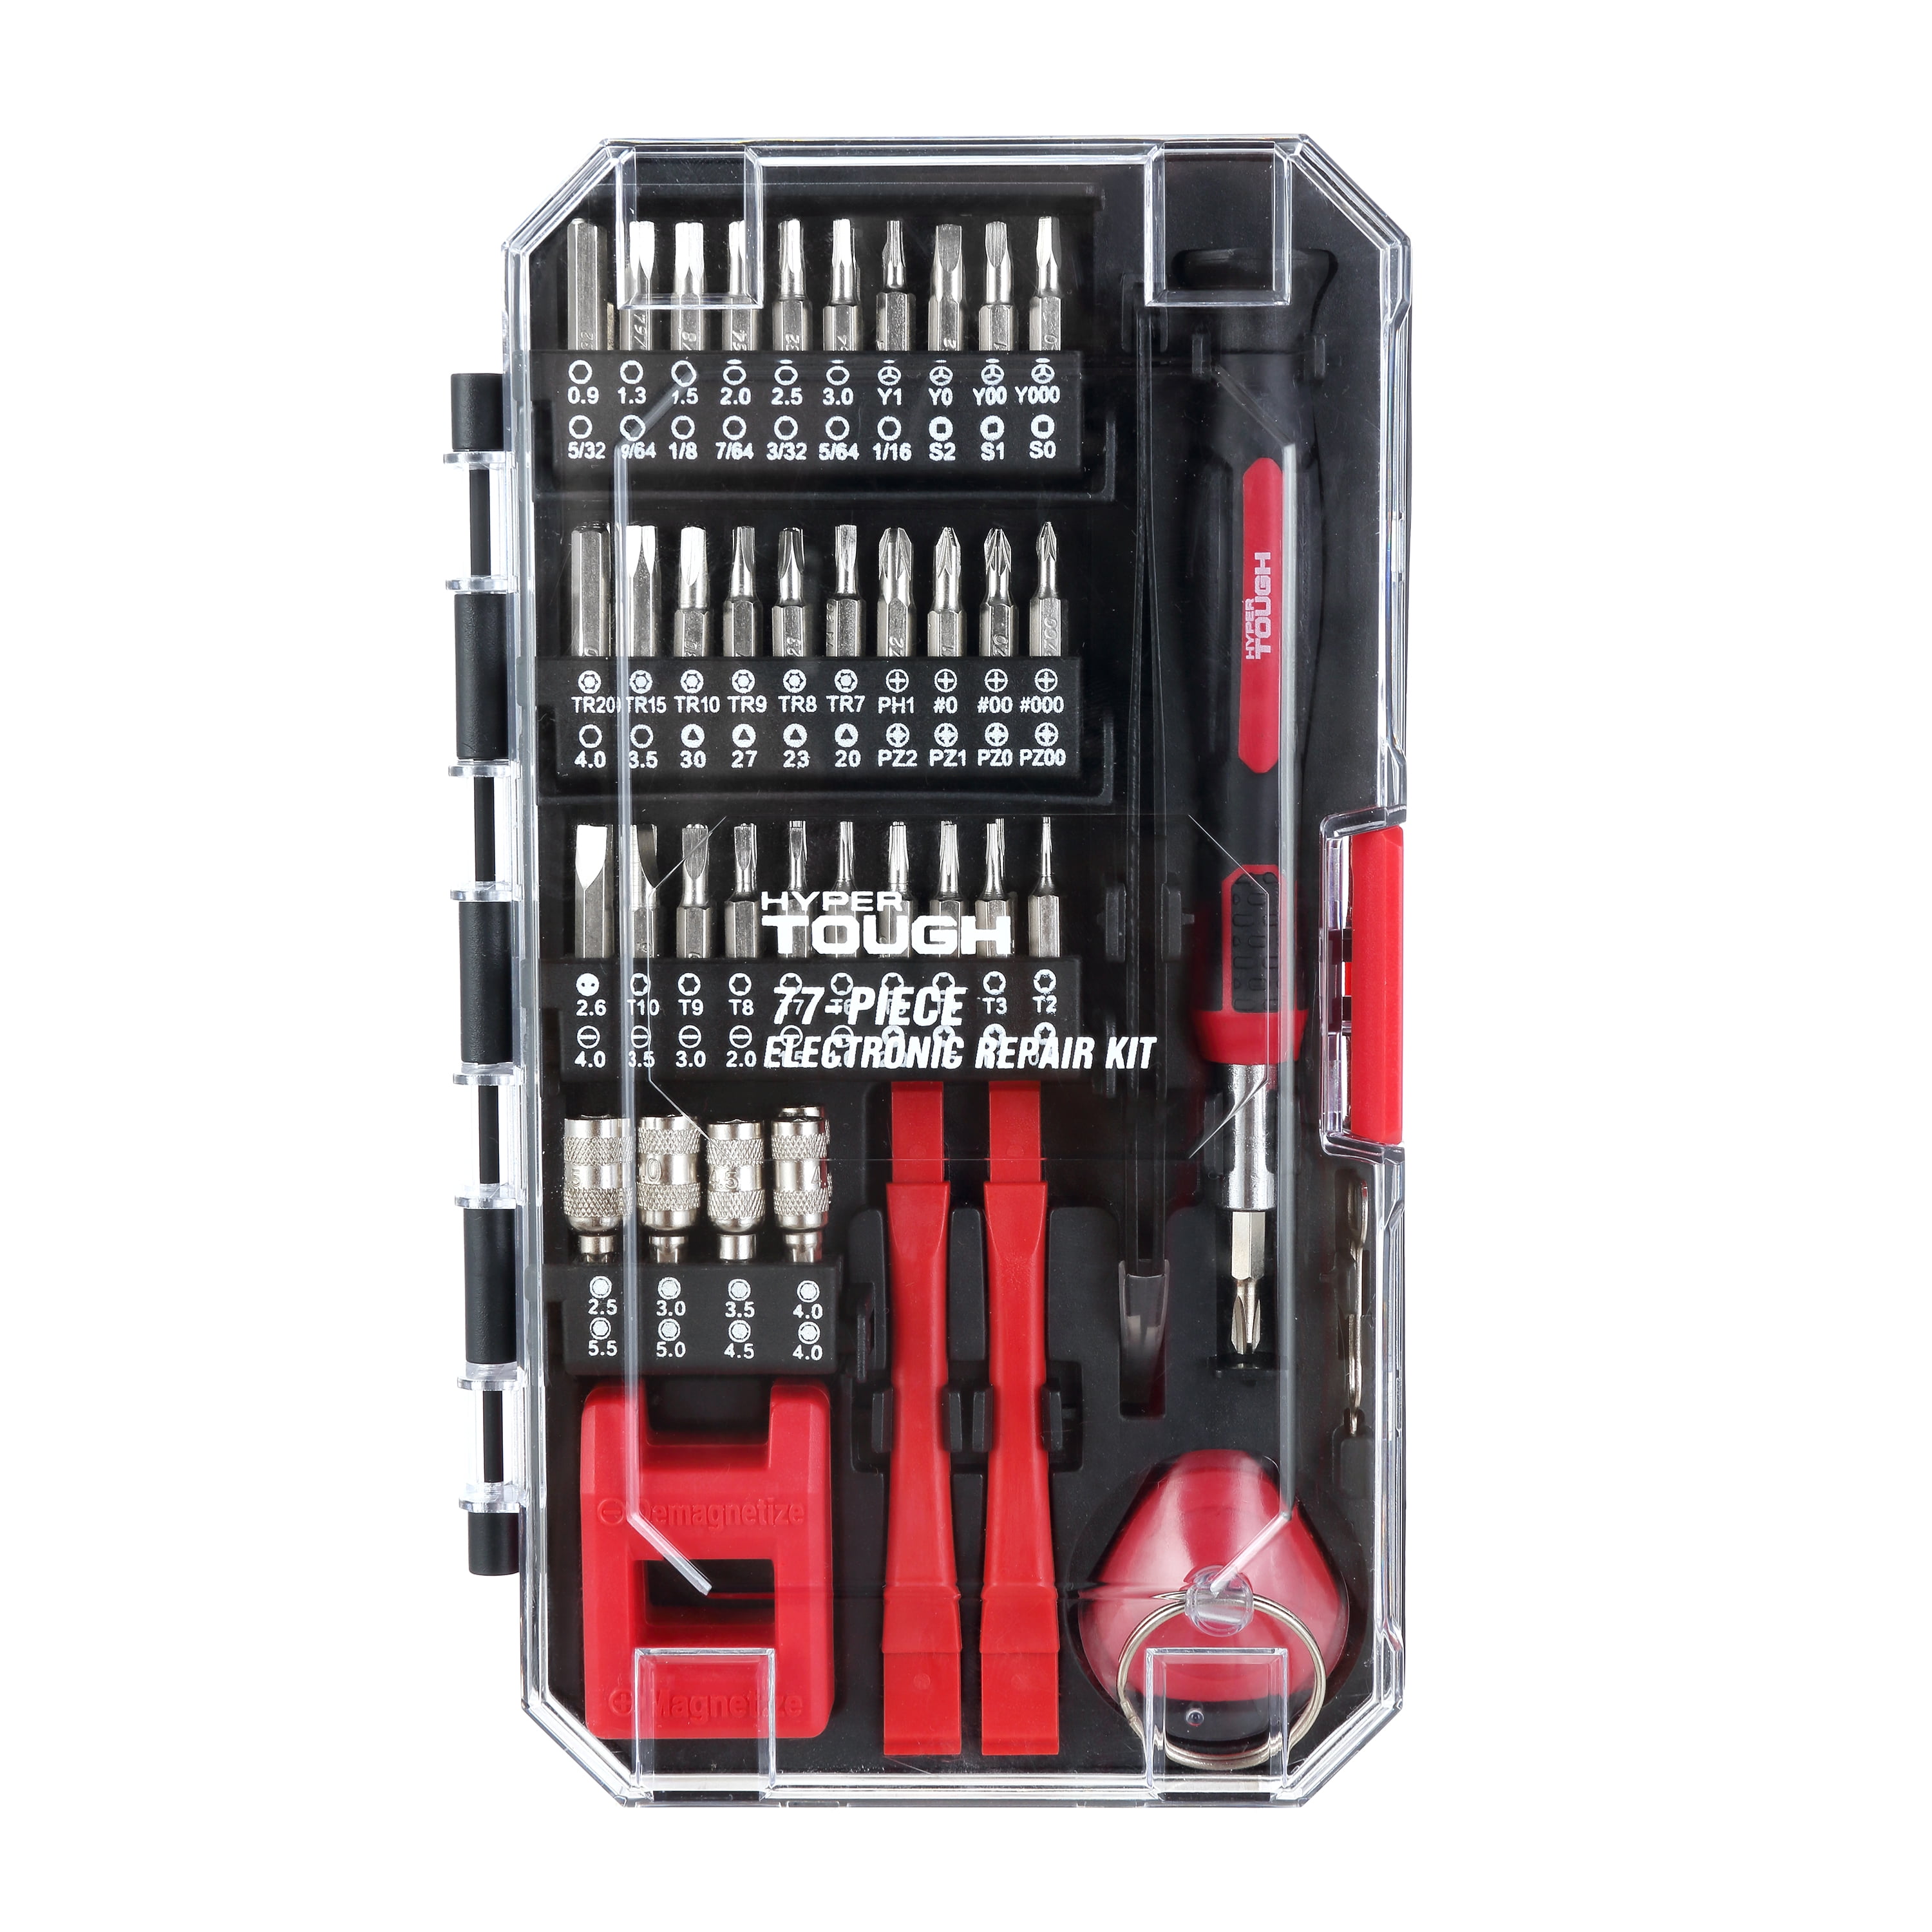 33 Piece Tool set Hyper per Tough 33-Piece Home Gift Set Hyper Tough 33 Piece Home Use Gift Set Includes 1-6 in Long-Nose Plier 1-6 in Slip Joint Plier 1-Bit Driver 2-4 in Screwdrivers Slot 